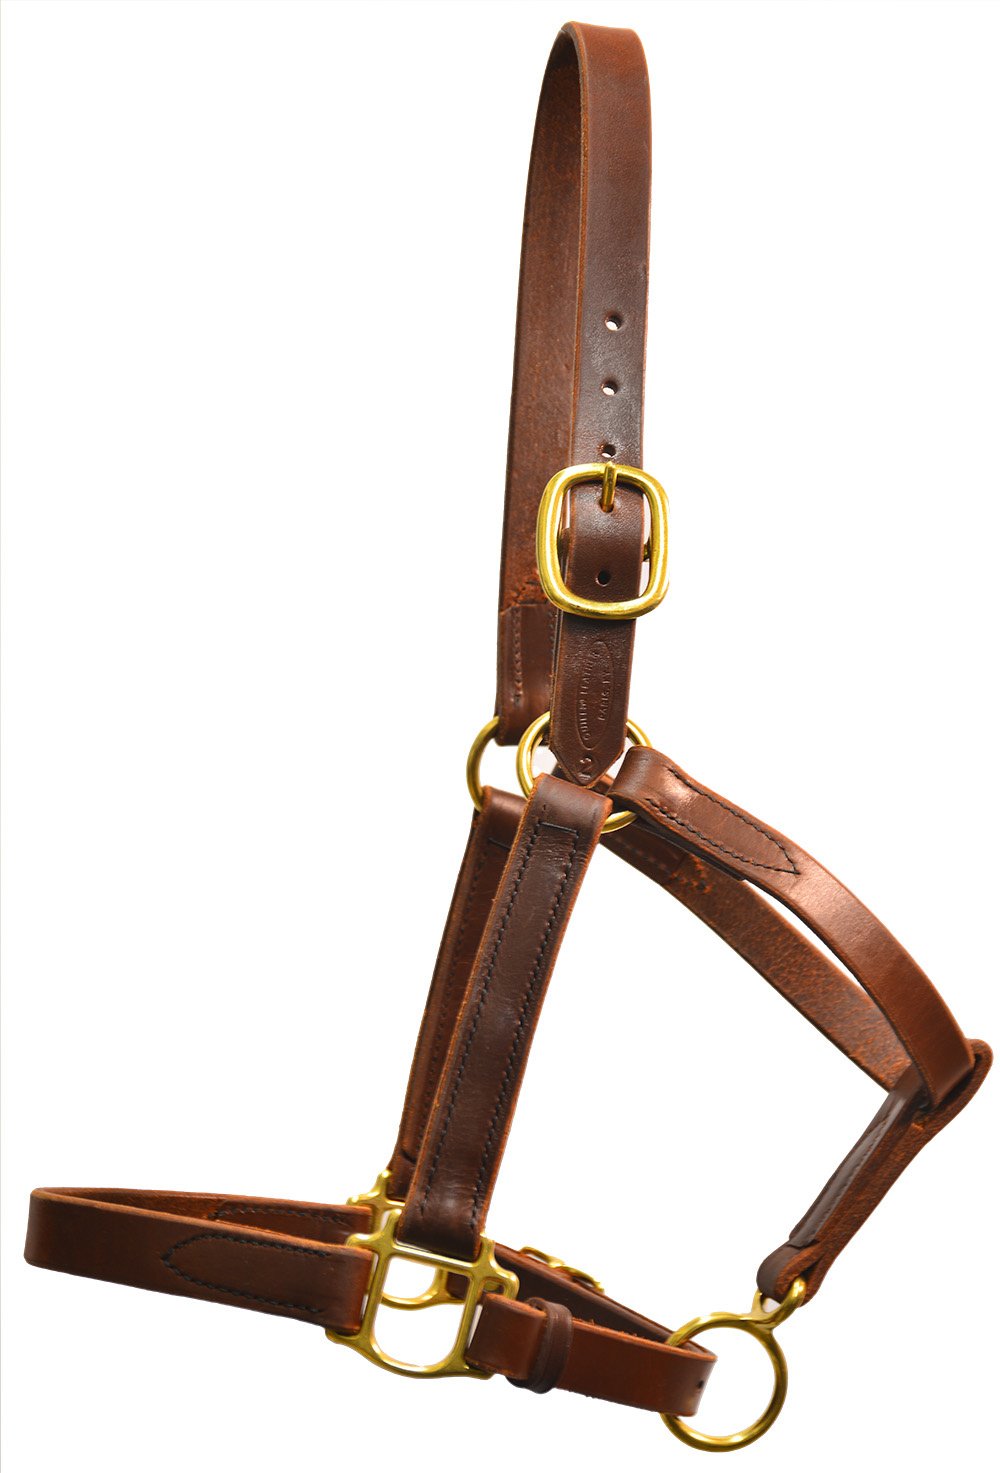 Brown Turnout Halter - Quillin Leather & Tack, Inc